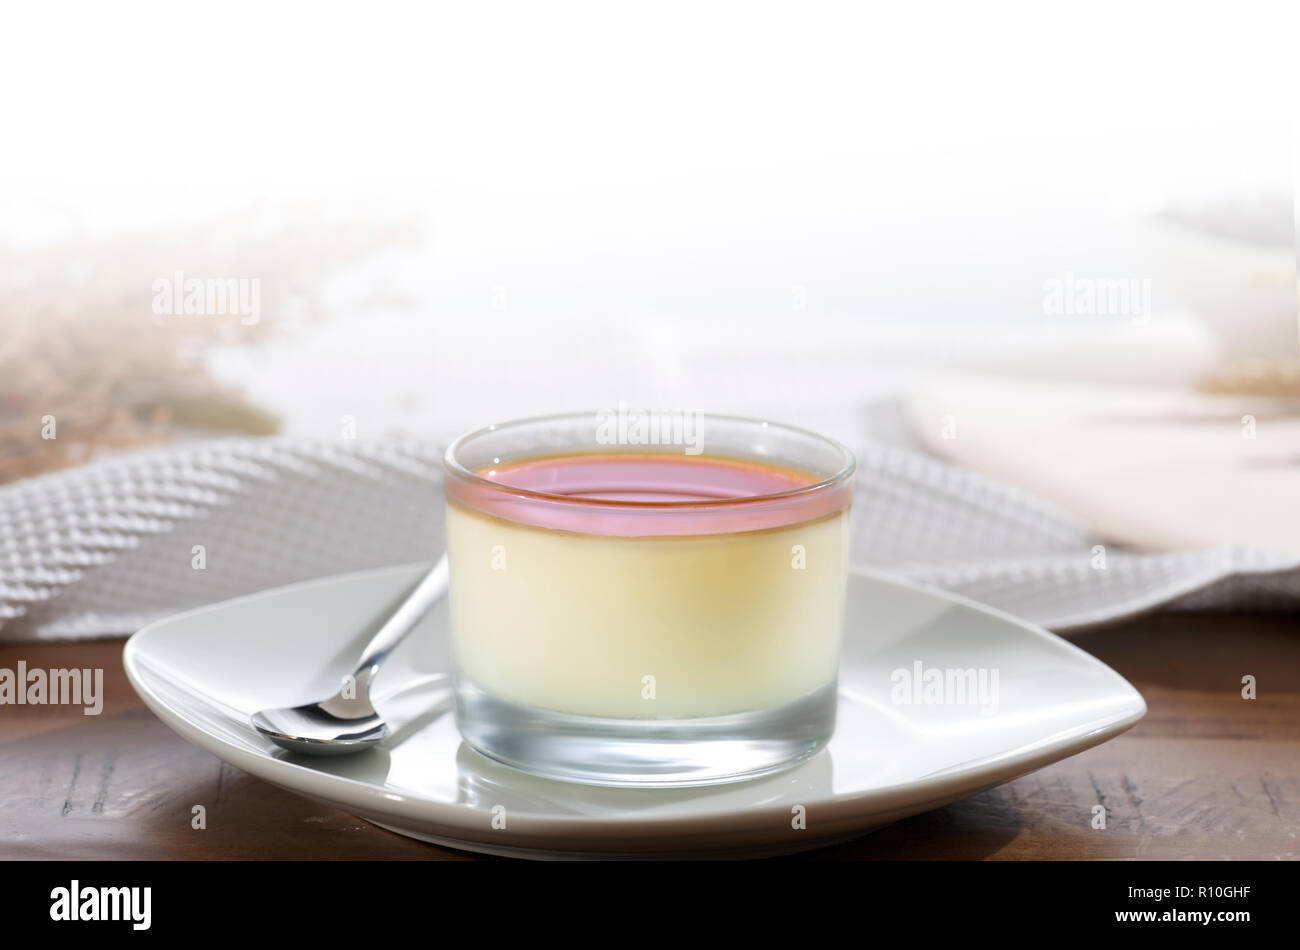 Close up of glass pudding creme caramel on plate with spoon, white tablecloth Stock Photo